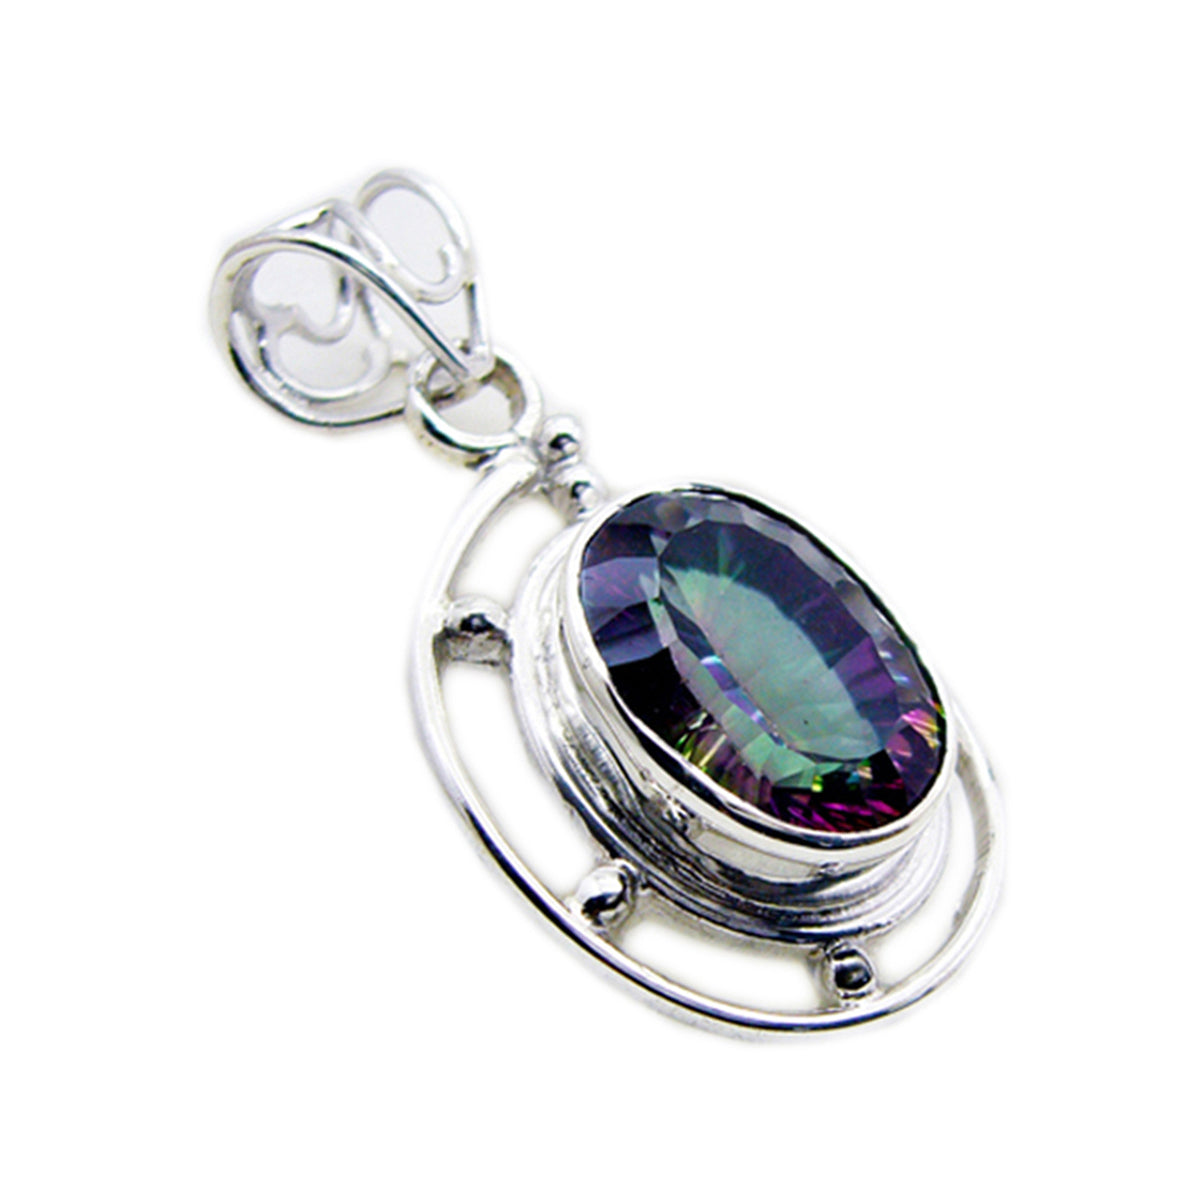 Riyo Gorgeous Gemstone Oval Faceted Multi Color Mystic Quartz Sterling Silver Pendant Gift For Friend